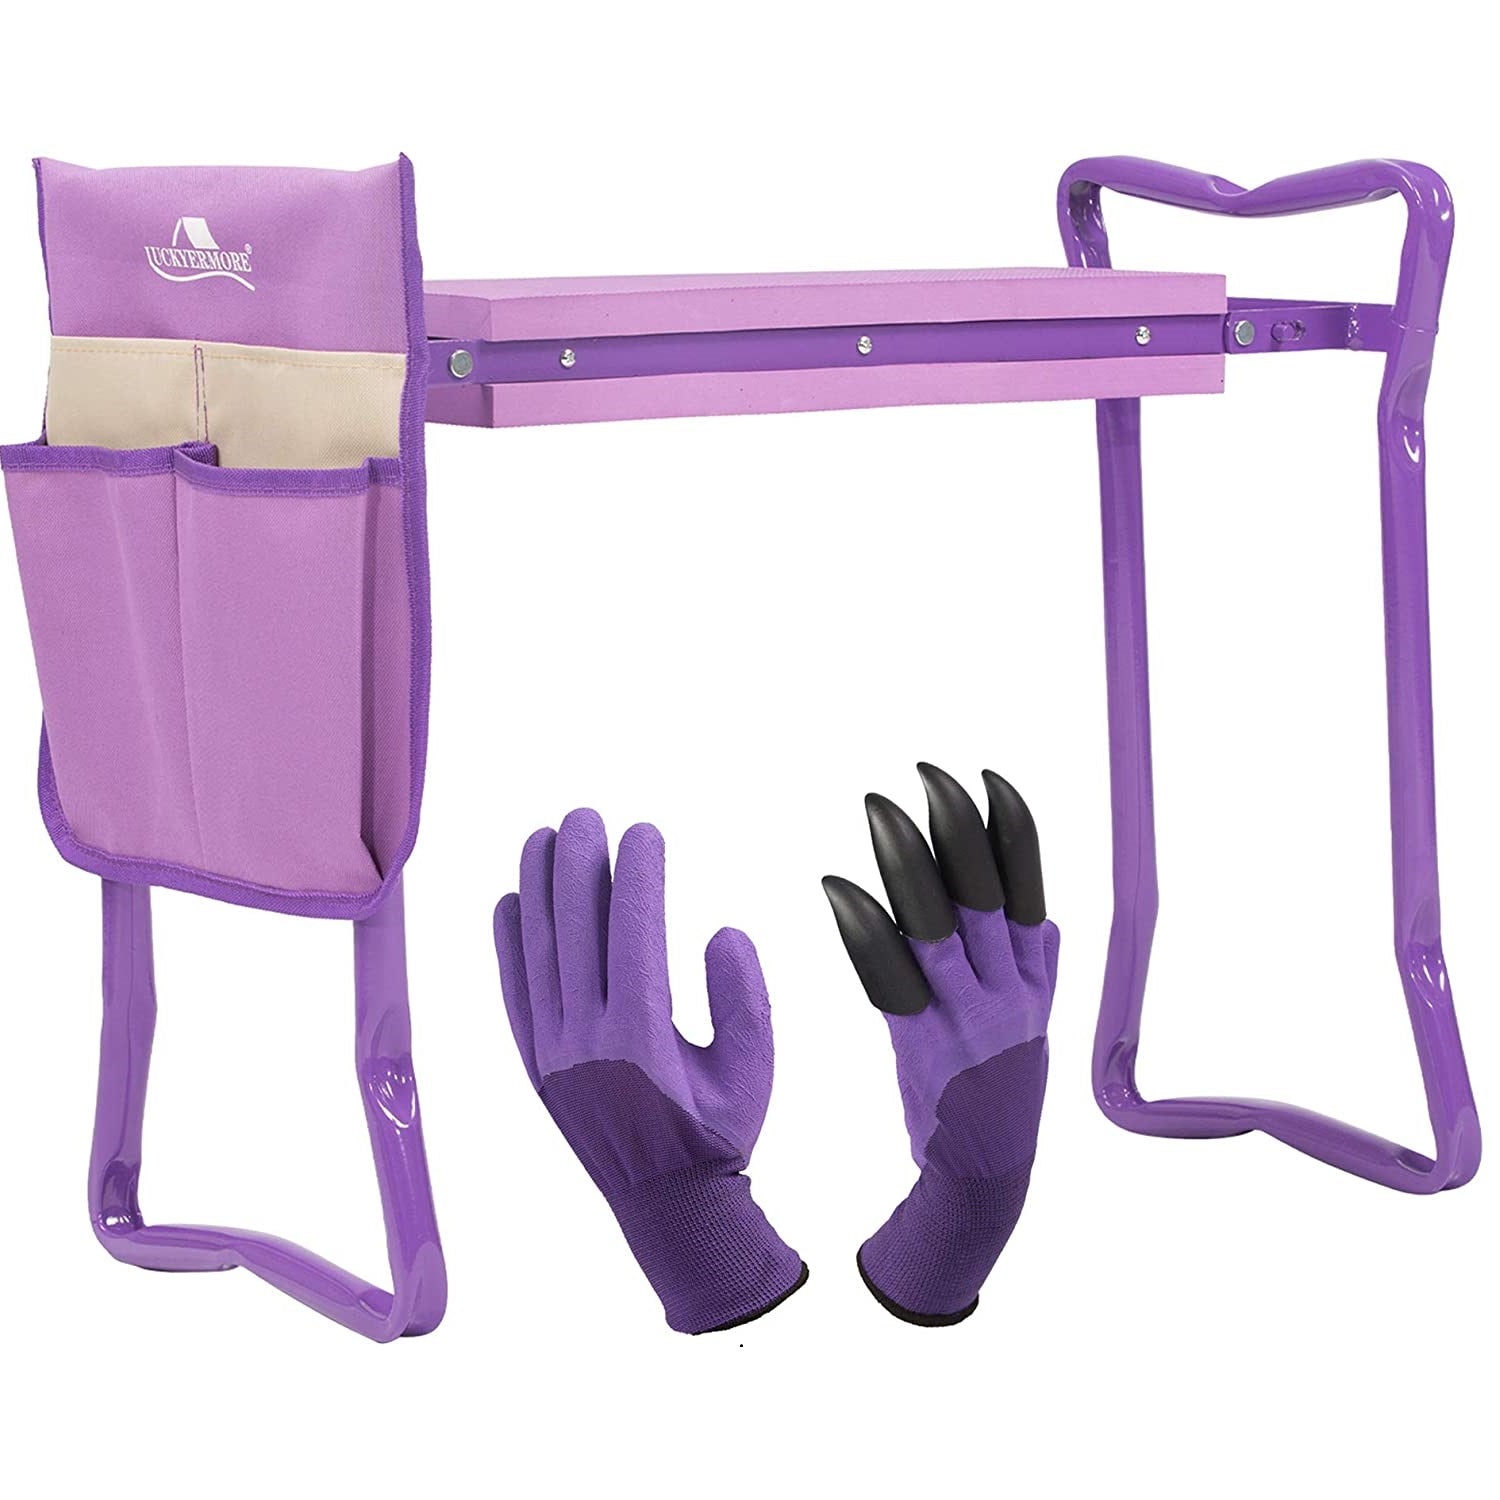 Foldable Garden Kneeling Bench Stool with Soft Foam and Tool Pouch, Purple